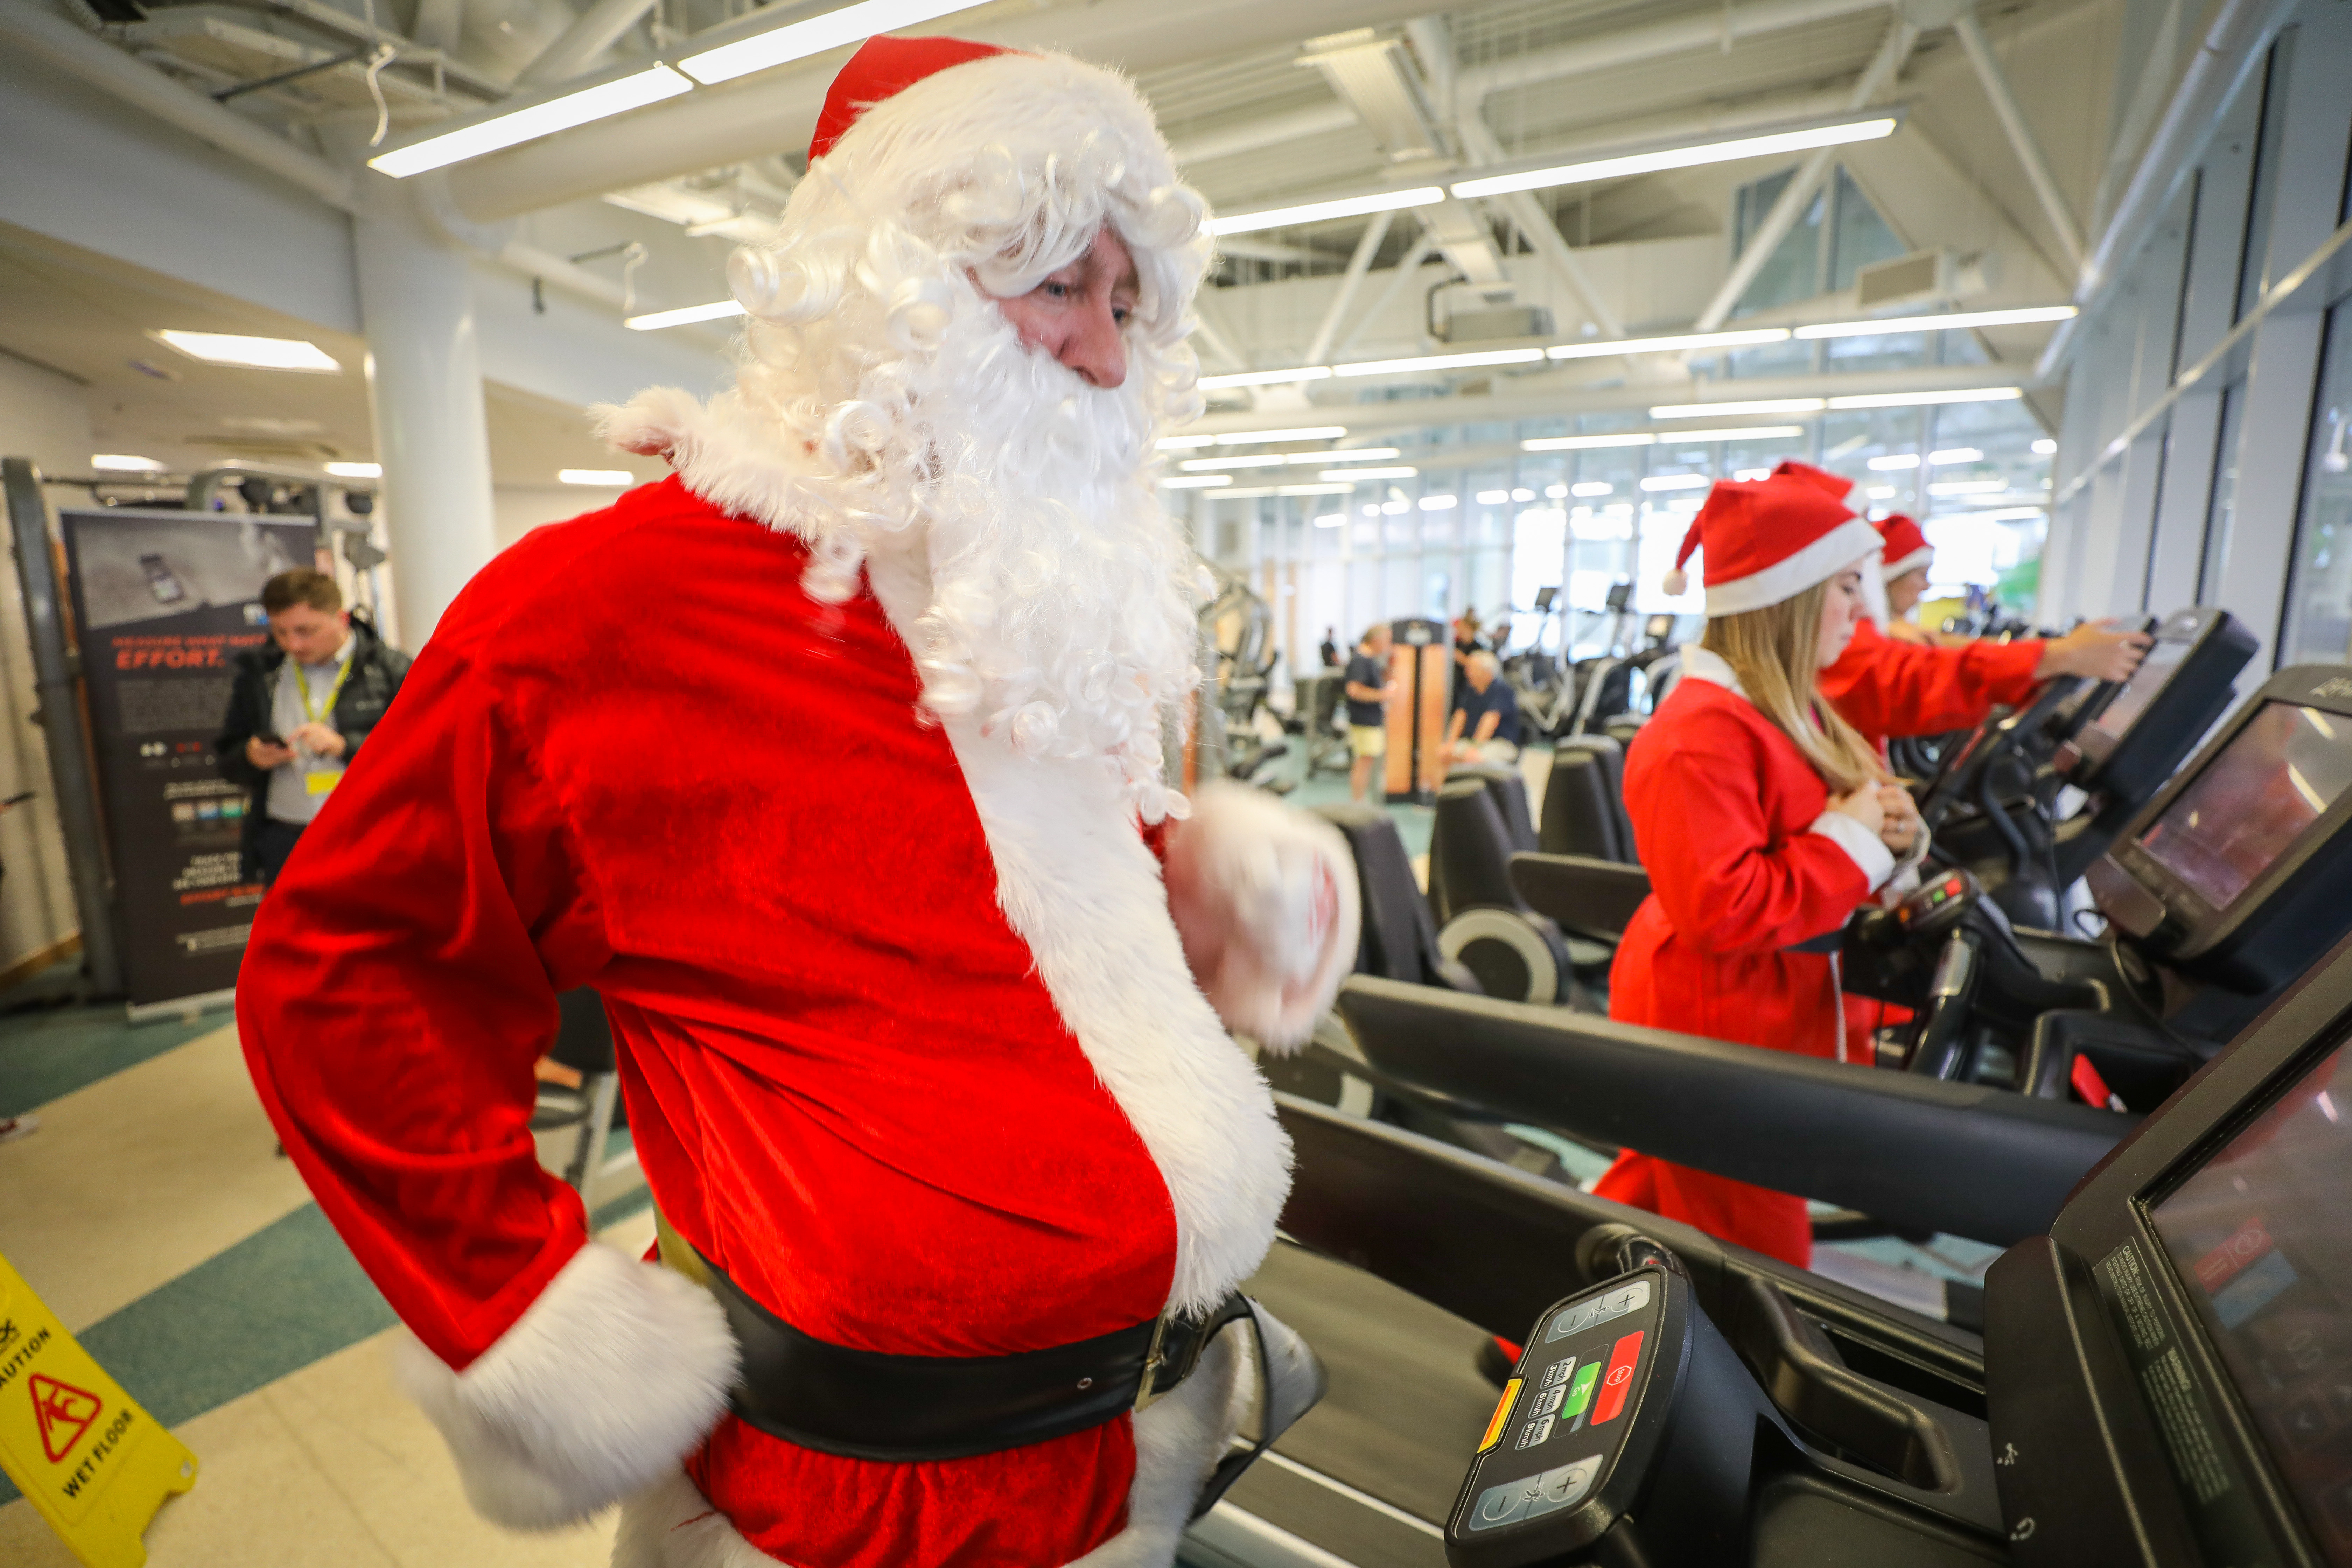 Santa (Garry Smith, organiser of the event) in training for the 5k at Olympia, Dundee.